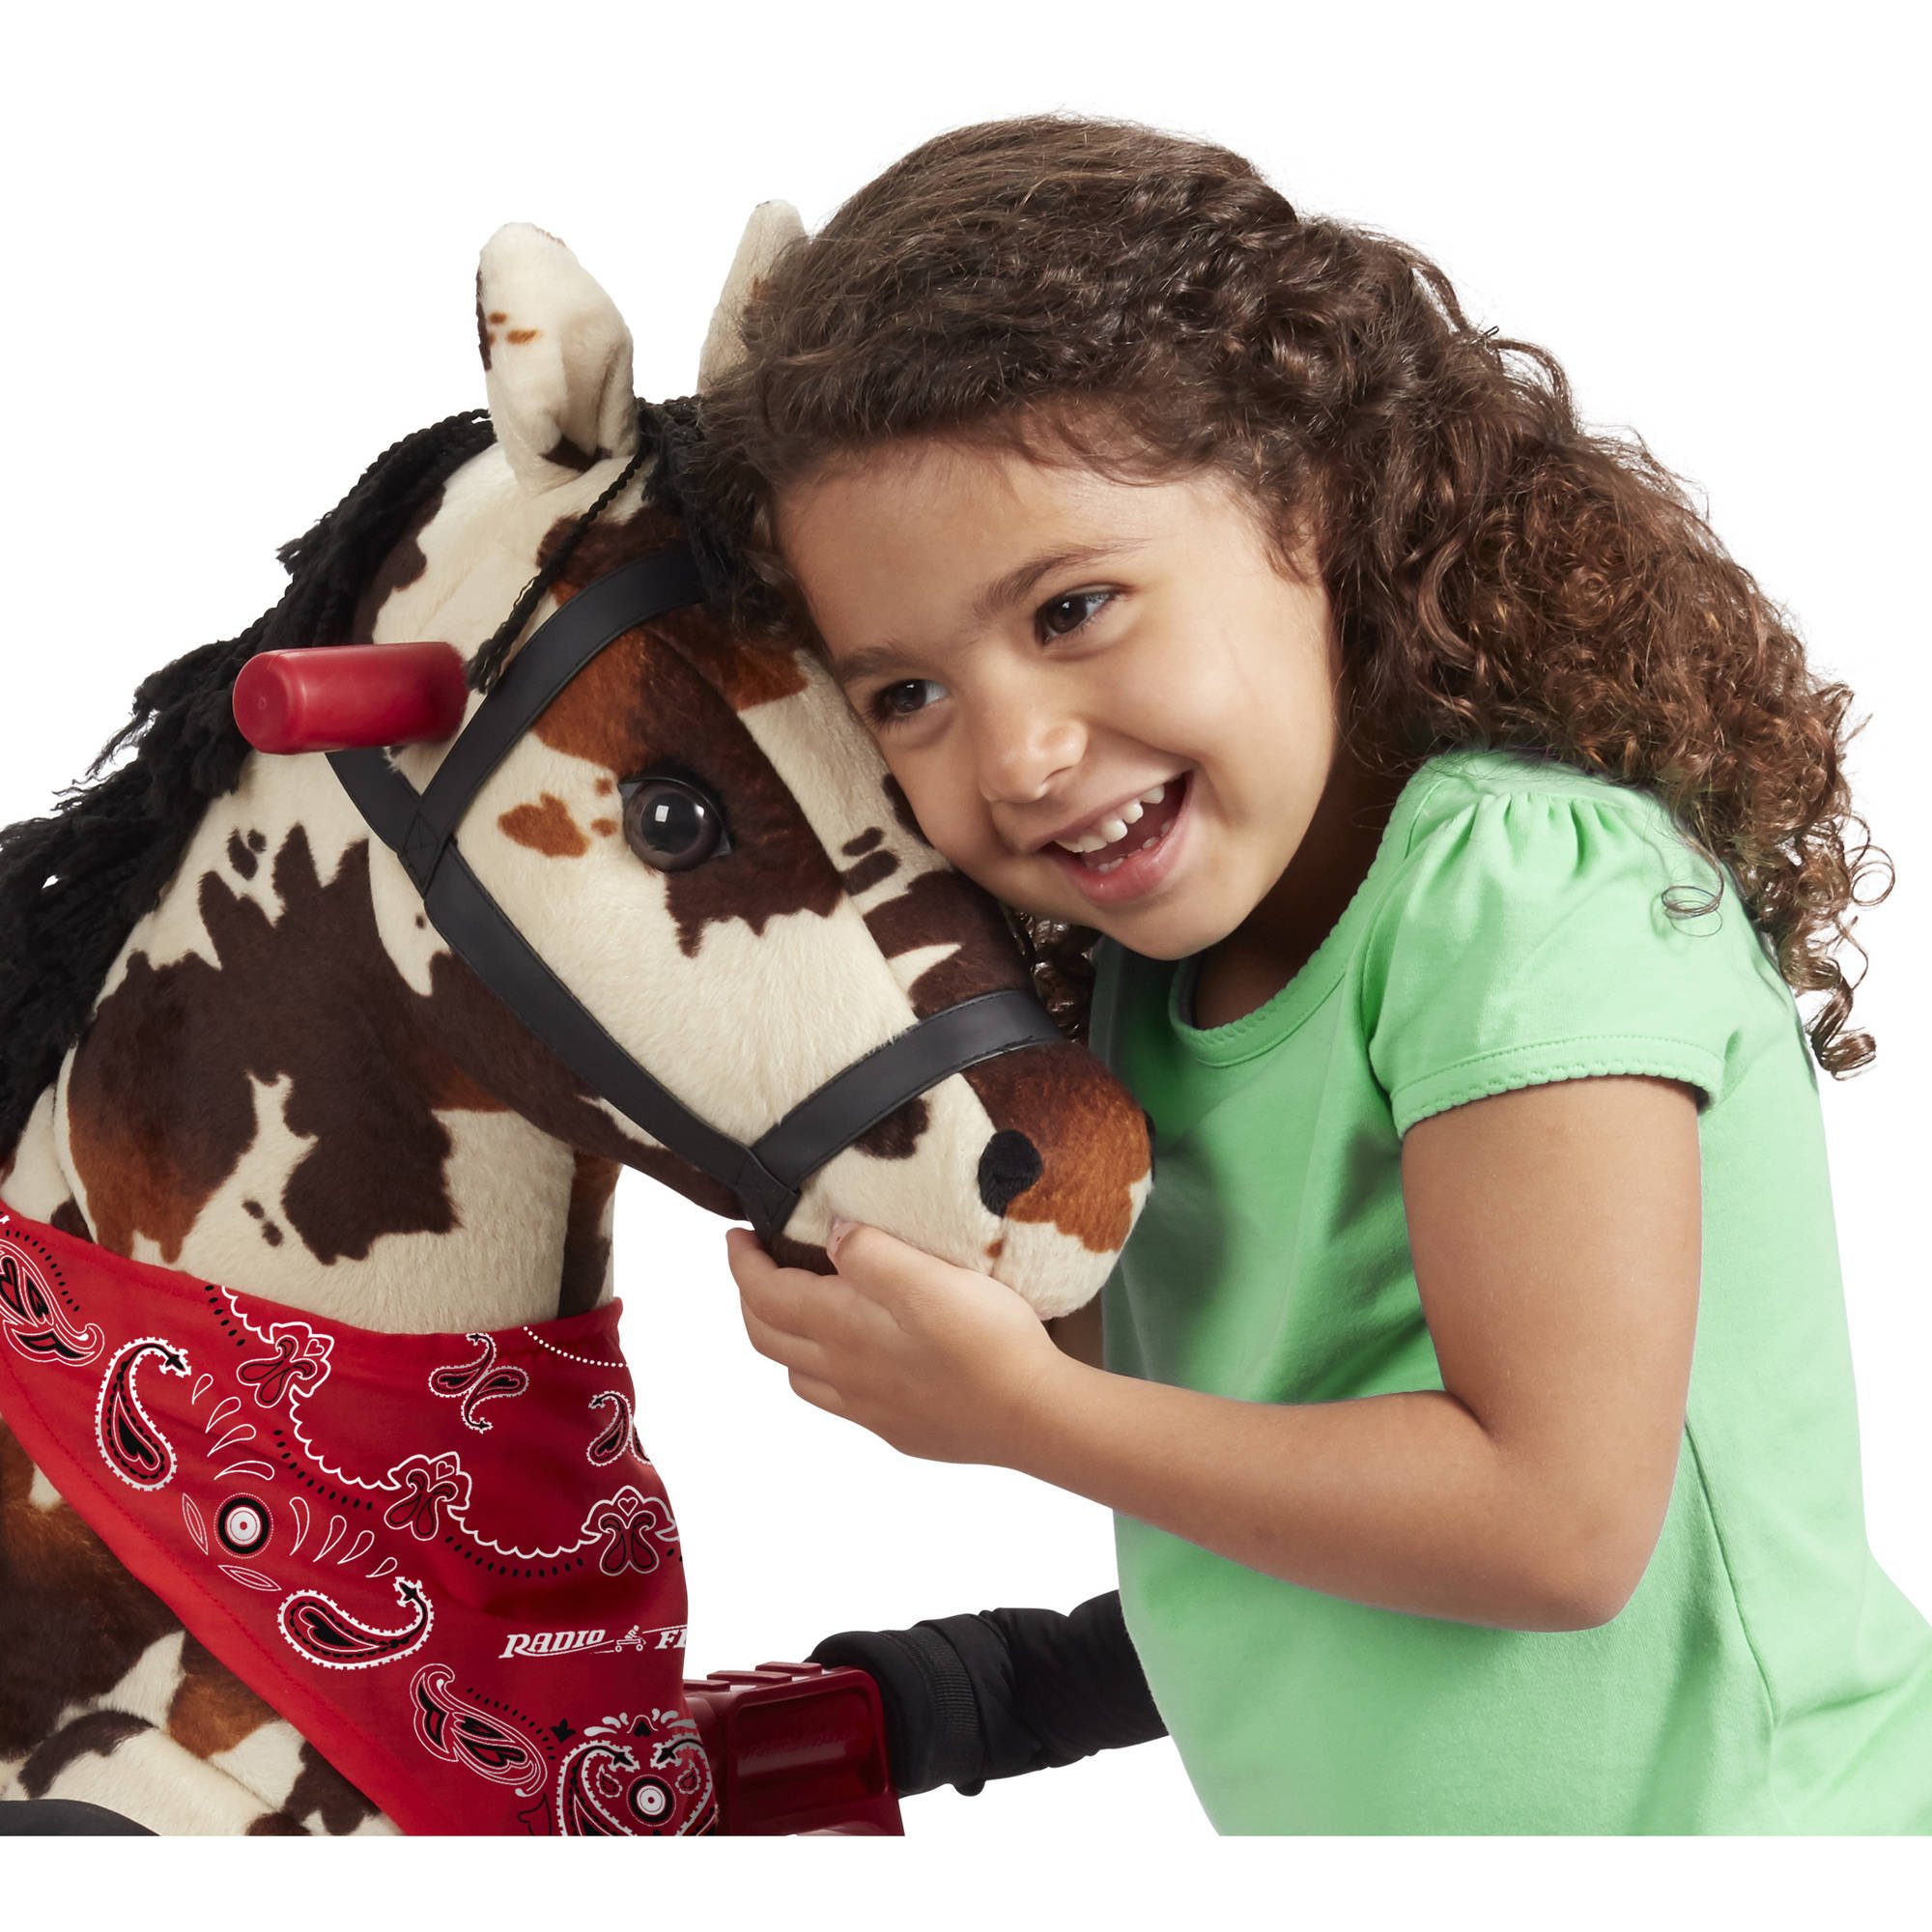 Radio Flyer, Freckles Interactive Spring Horse, Ride-on for Boys and Girls, for Kids 2 - 6 years old - image 4 of 18